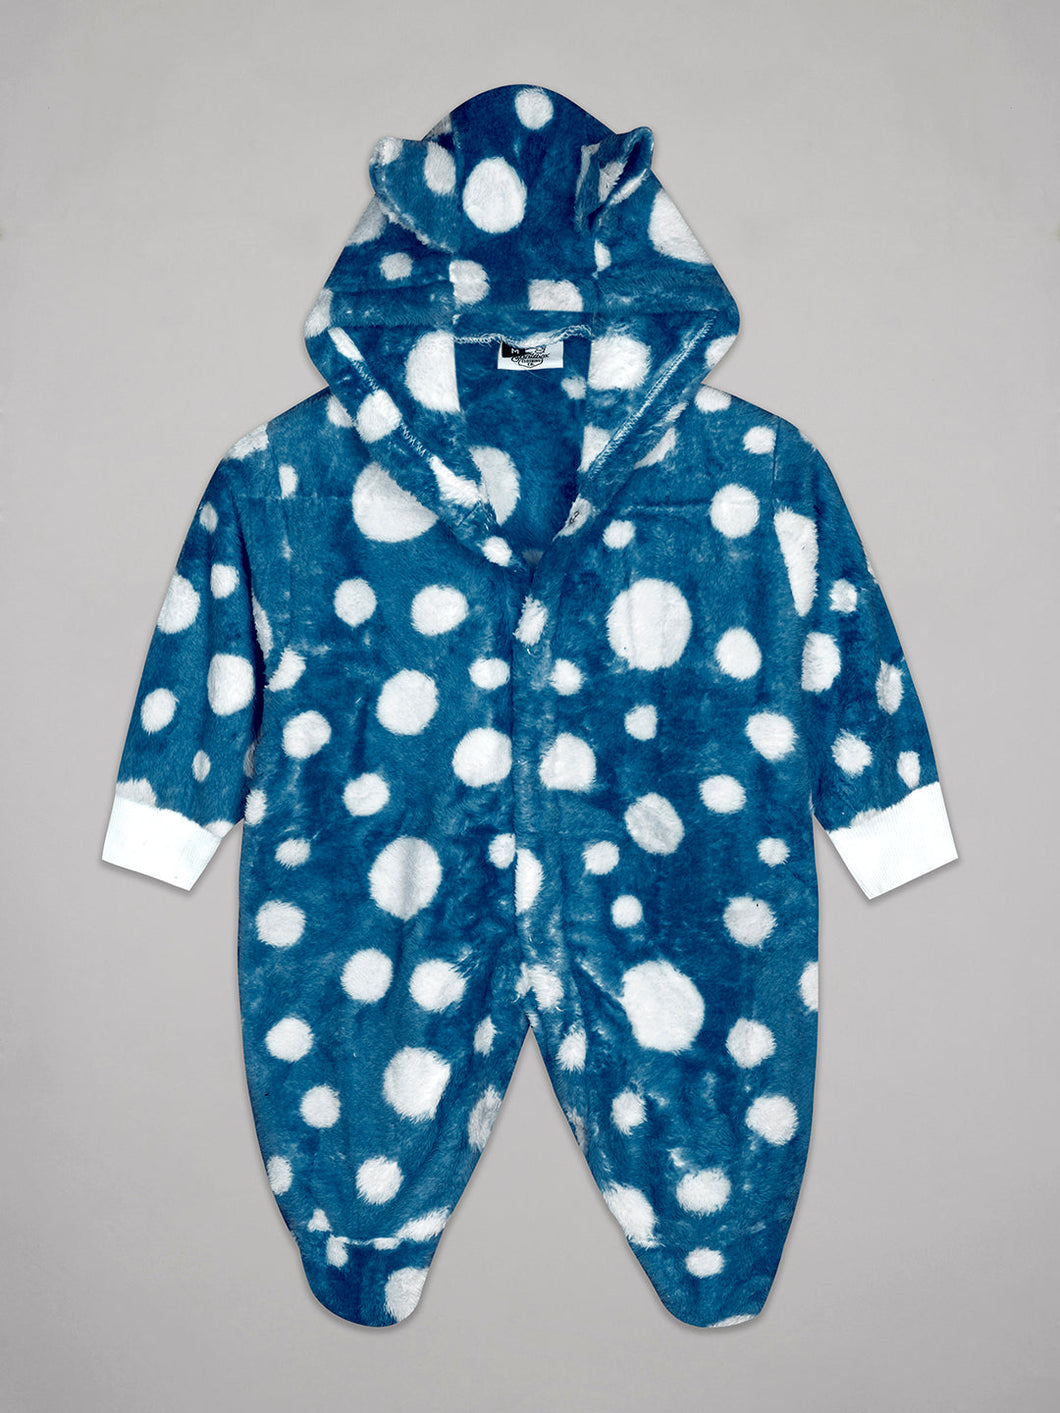 The Sandbox Clothing Co. Winter Rompers RM281